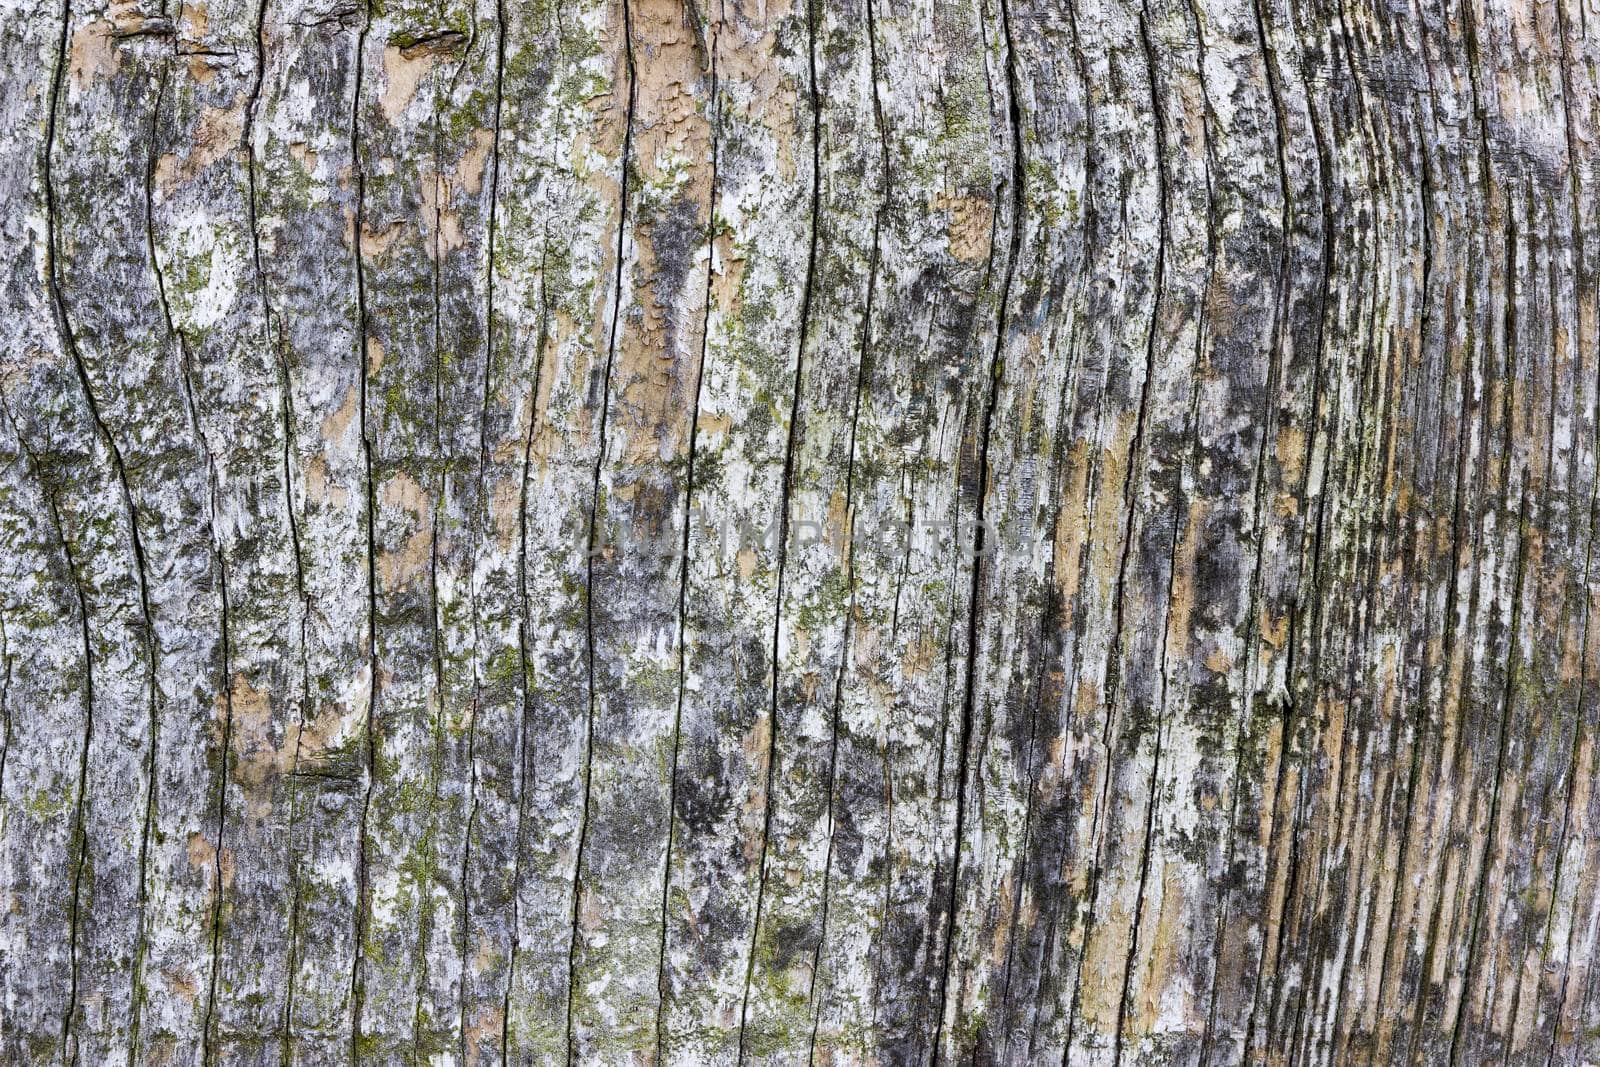 An abstract of weathered wood. The wood is heavily weathered and lightly cracked along the wood grain.